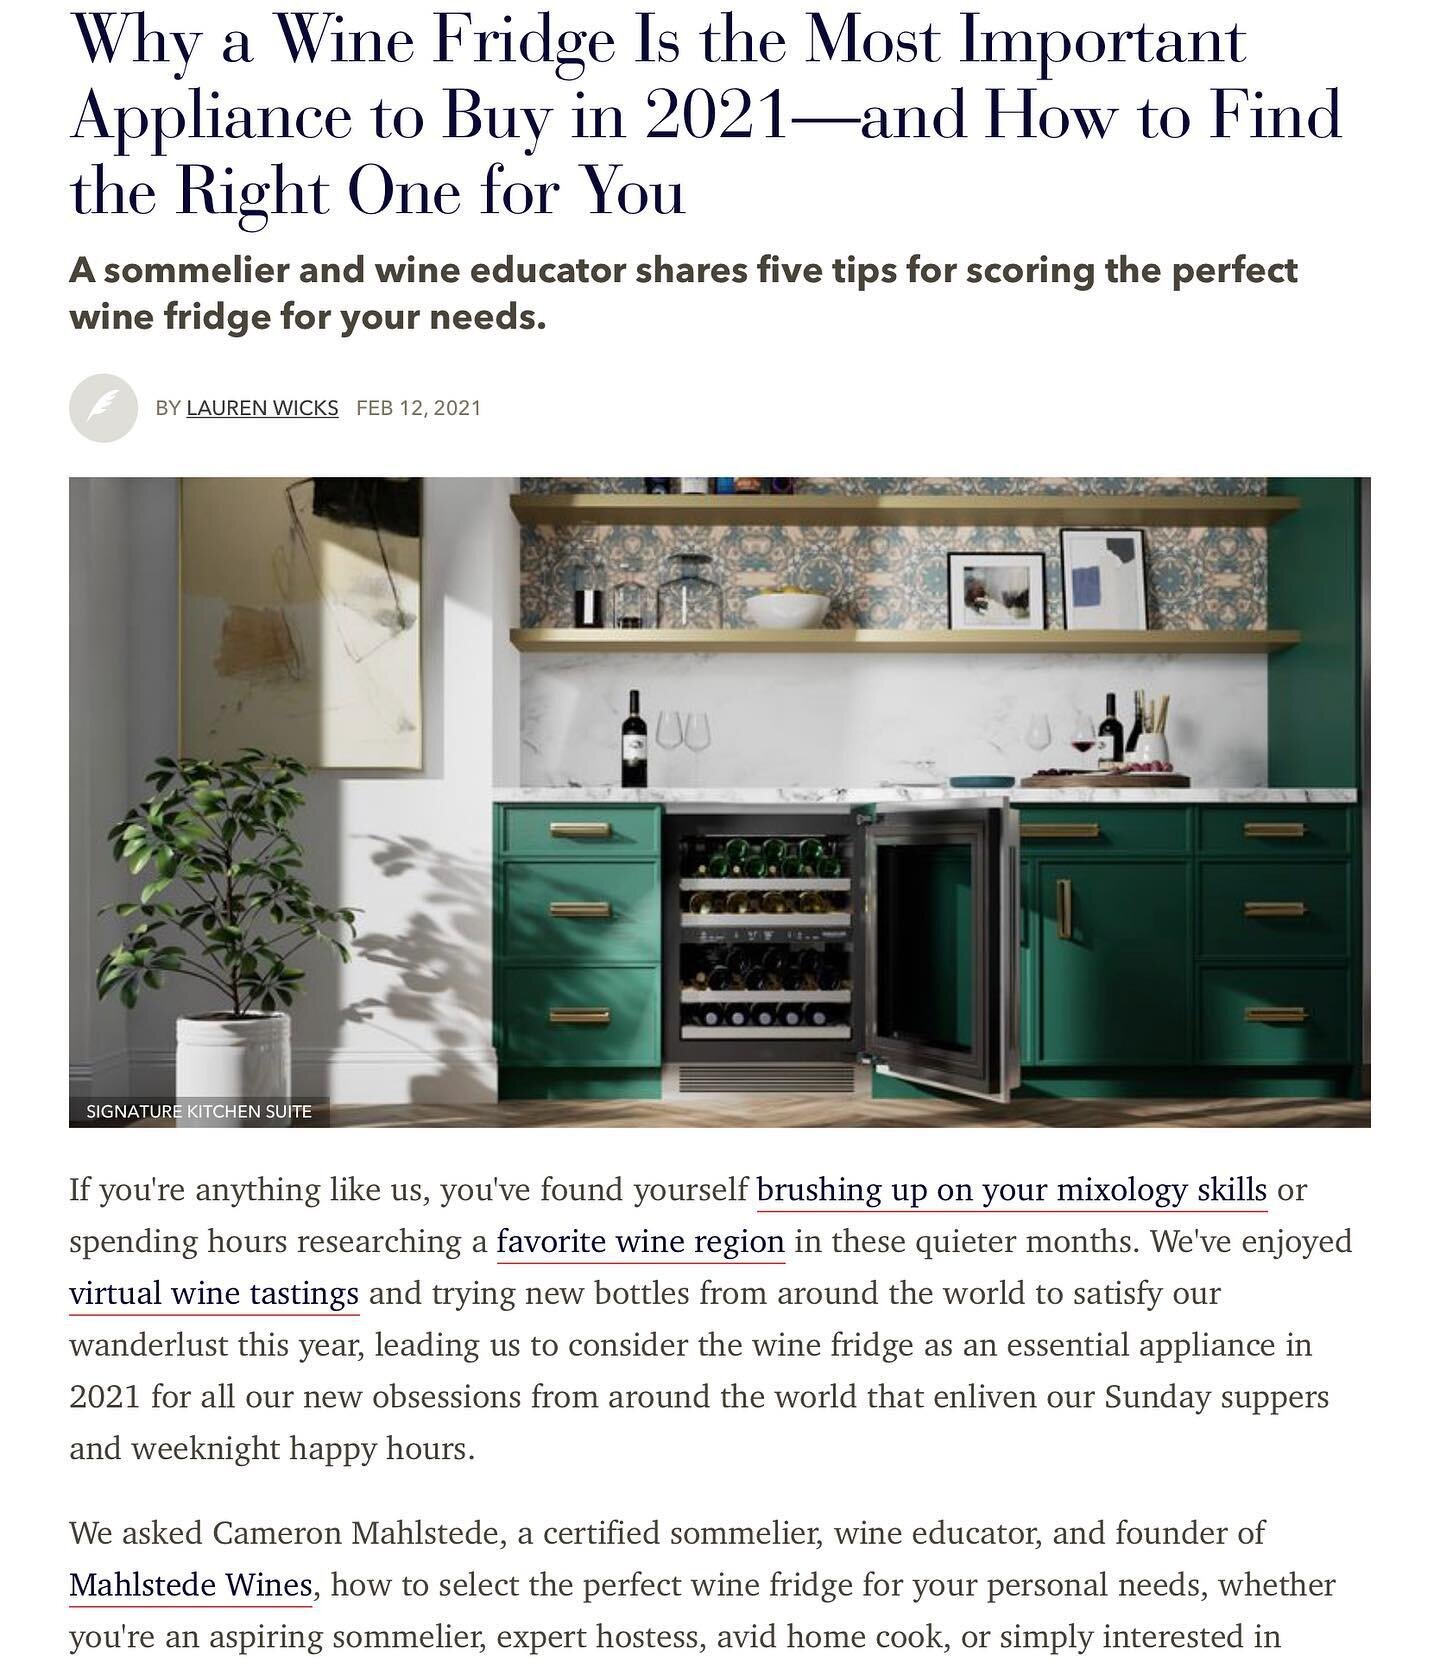 Thanks to Veranda Magazine (@verandamag) and @lo_wicks for featuring some of our thoughts on wine fridges! If you&rsquo;re shopping for a new one or upgrading your current situation, definitely check out the piece! 
.
.
.
.

#wine #winefridge #wineof